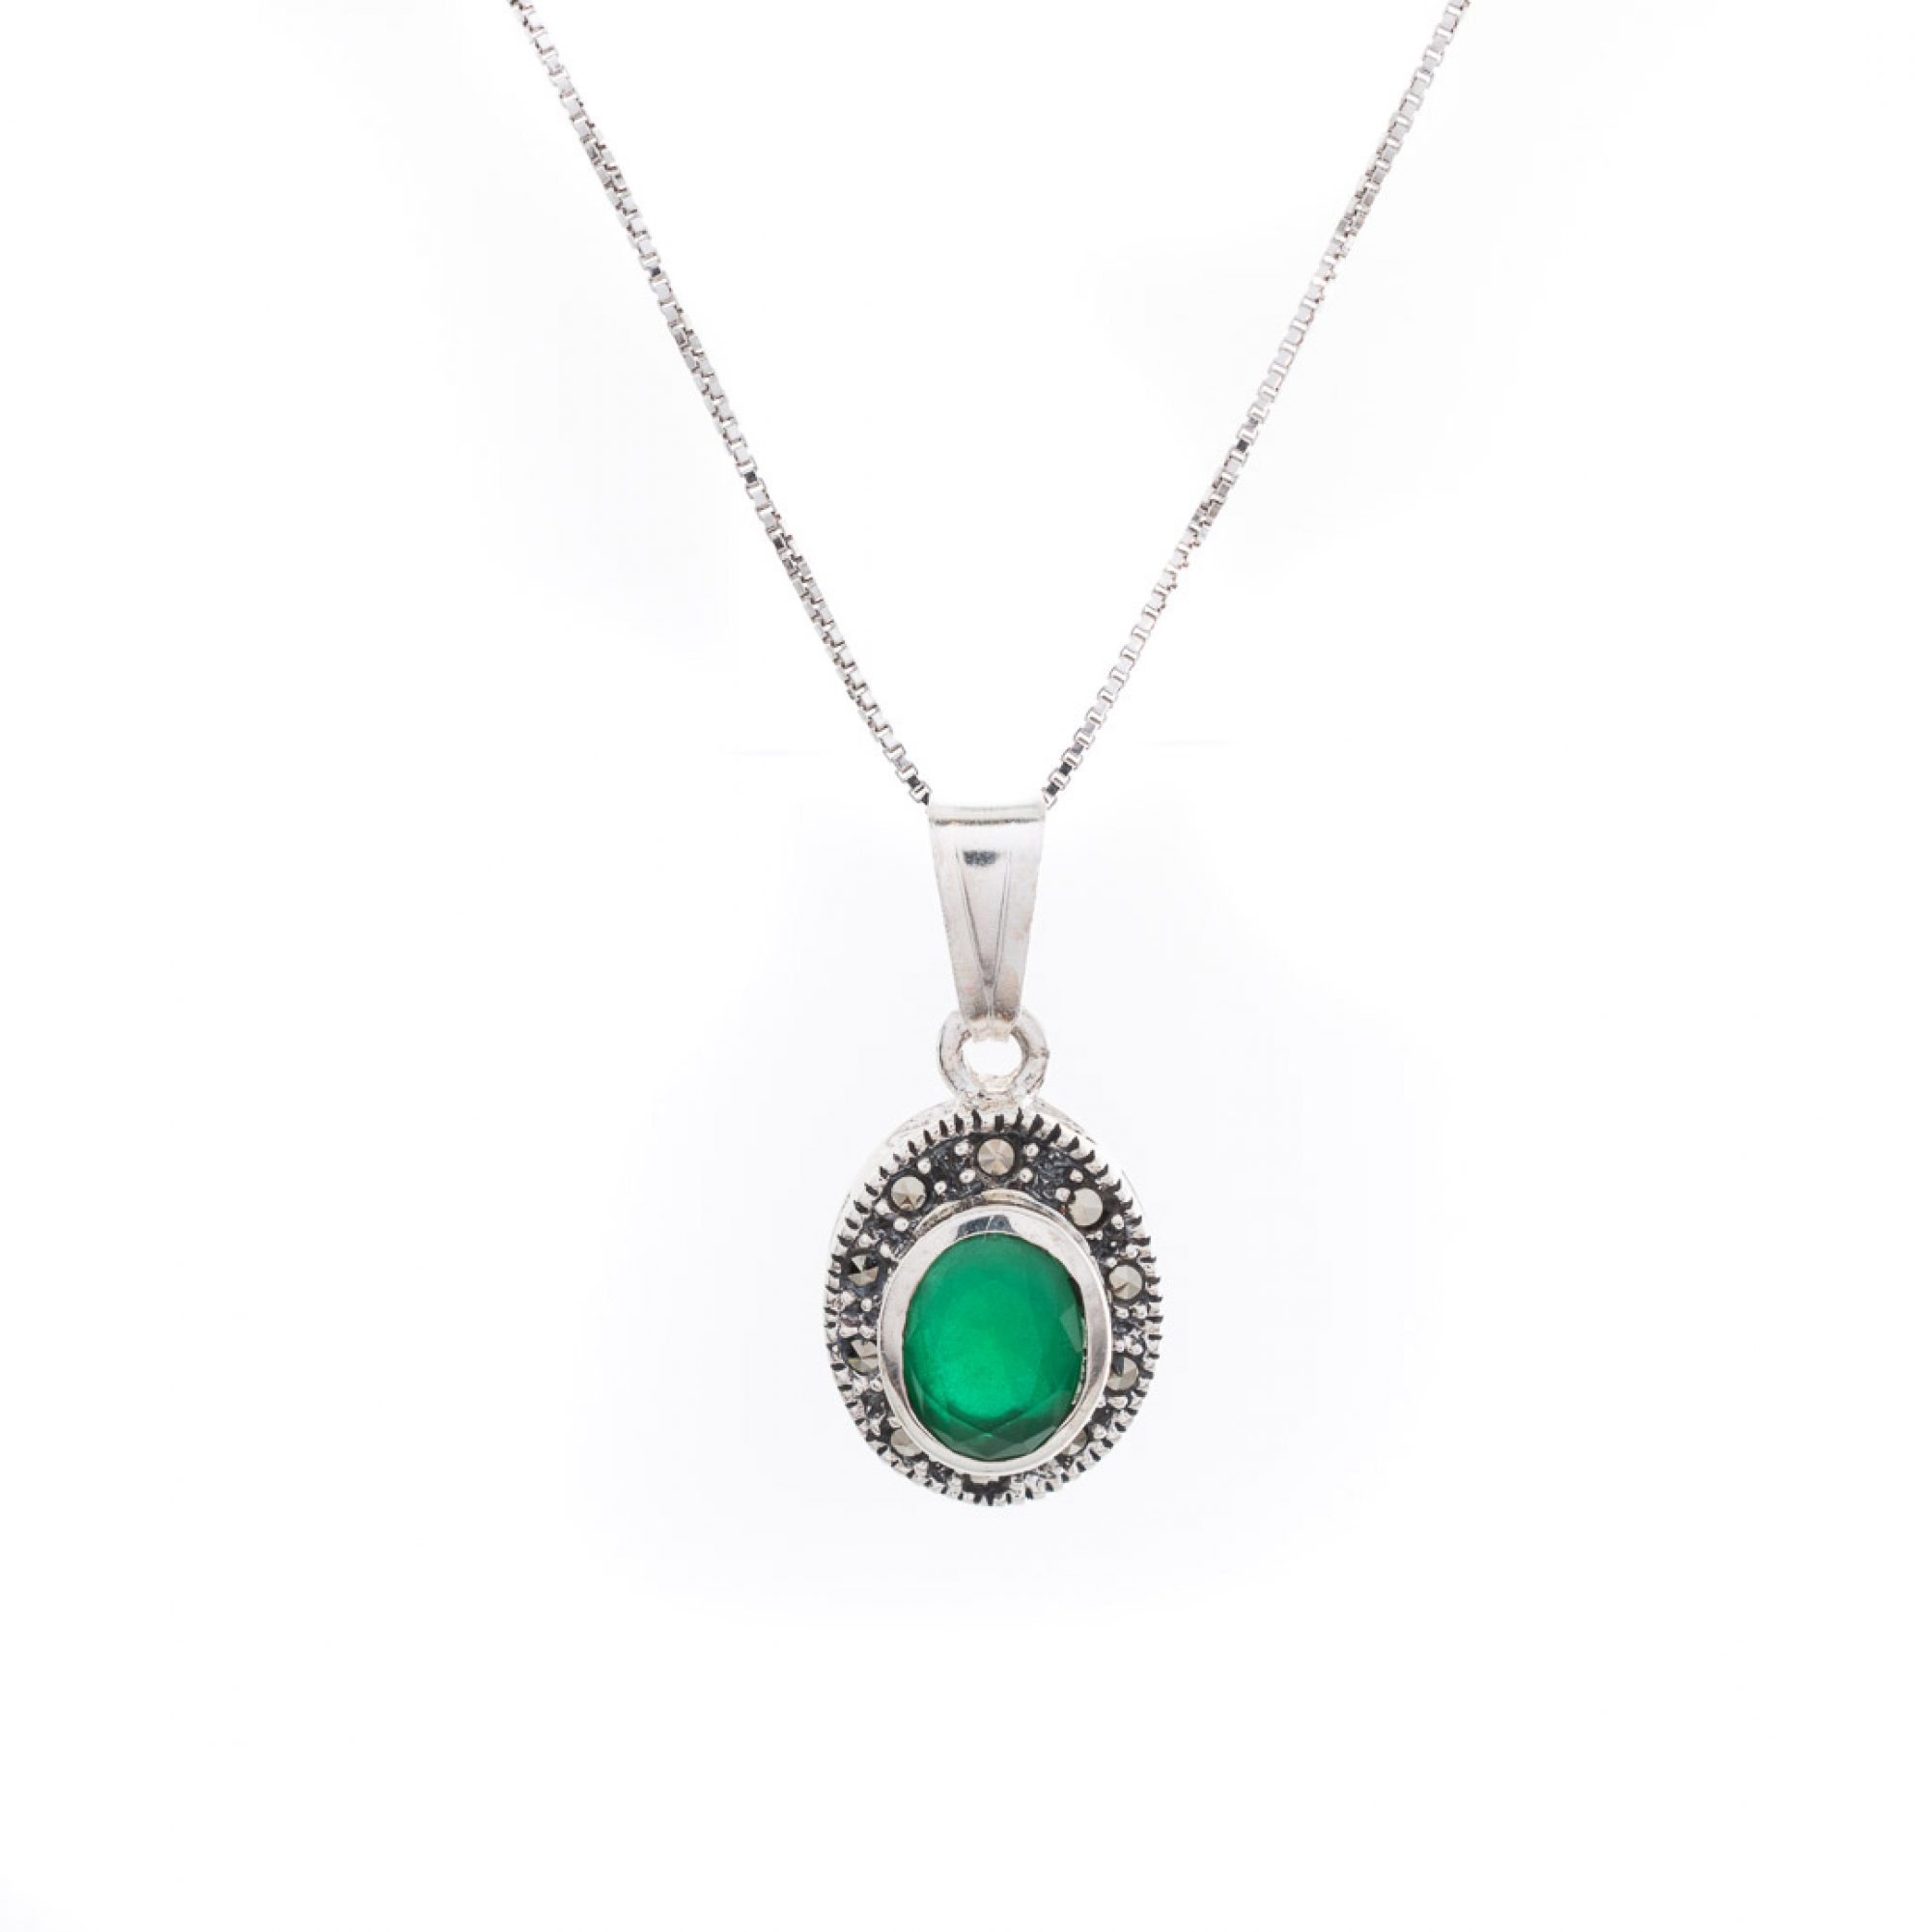 Necklace with marcasites and emerald stone